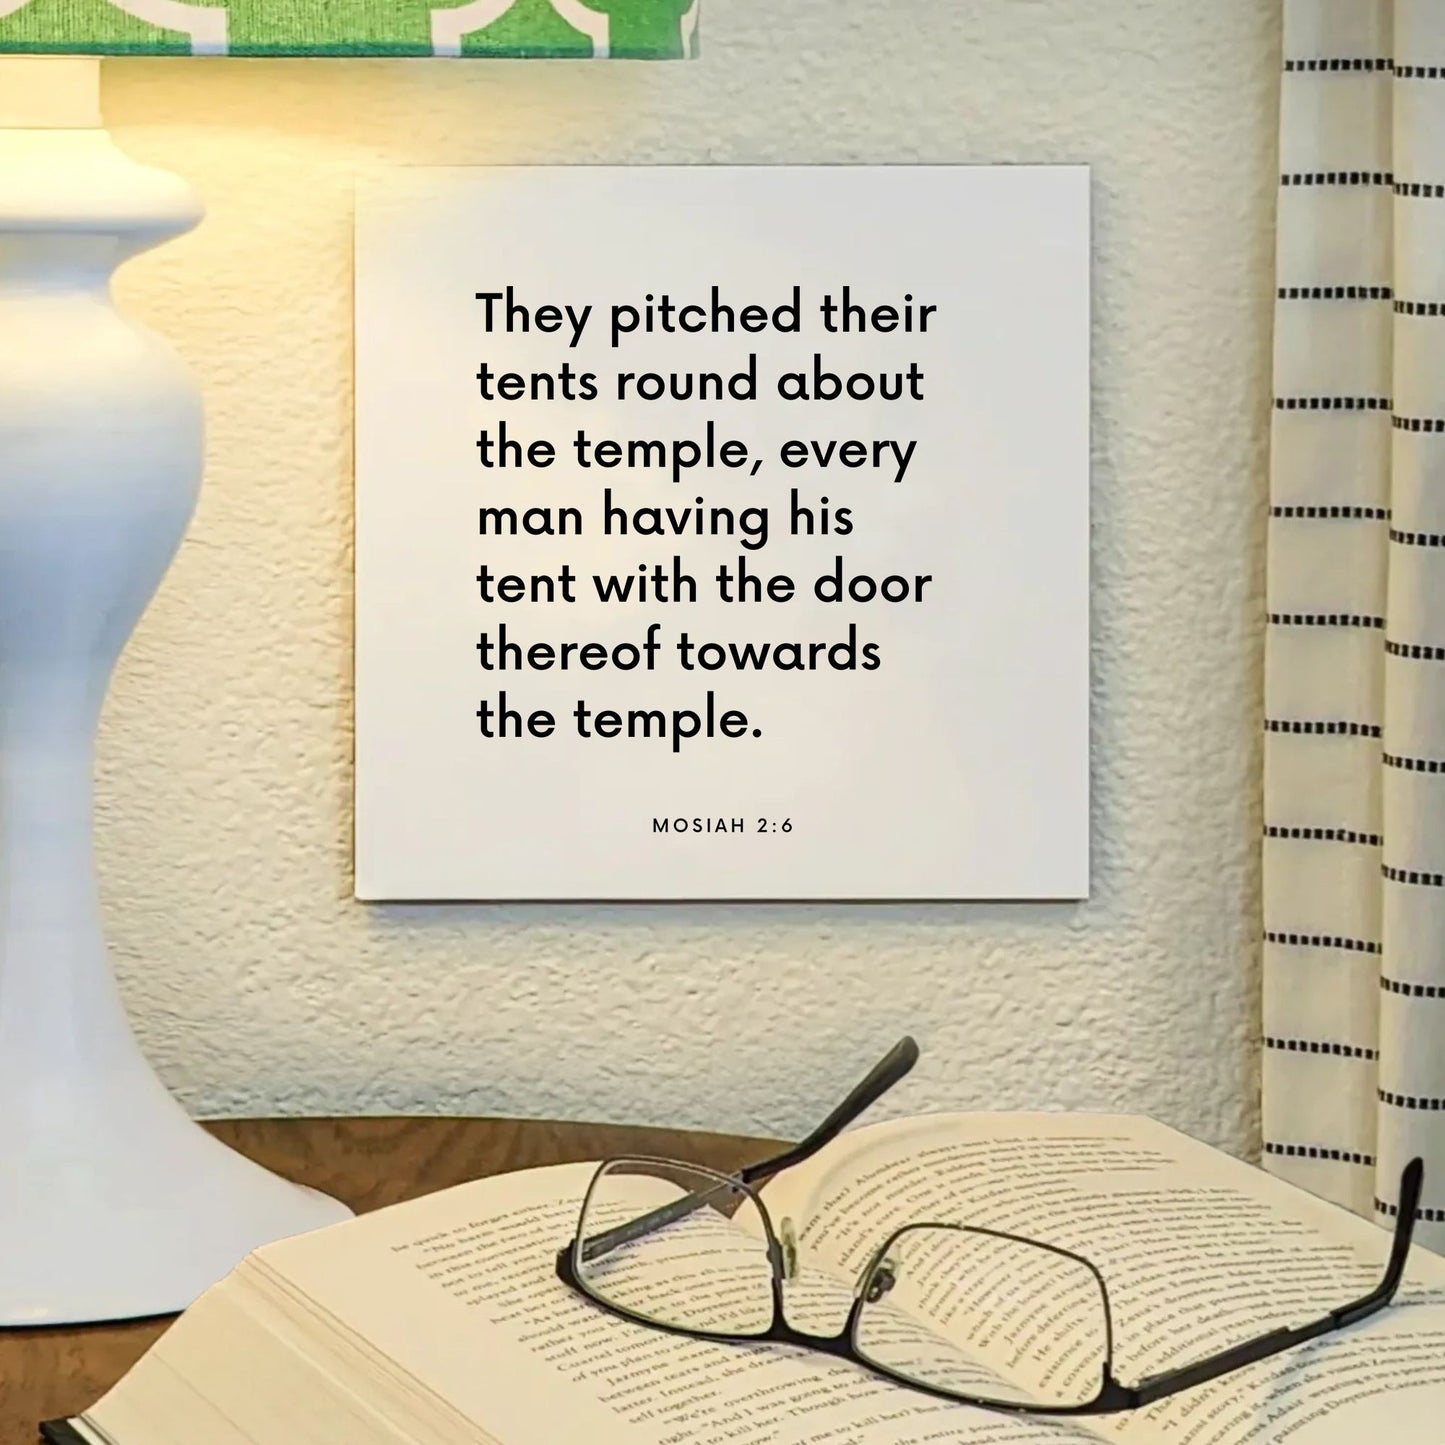 Lamp mouting of the scripture tile for Mosiah 2:6 - "They pitched their tents round about the temple"